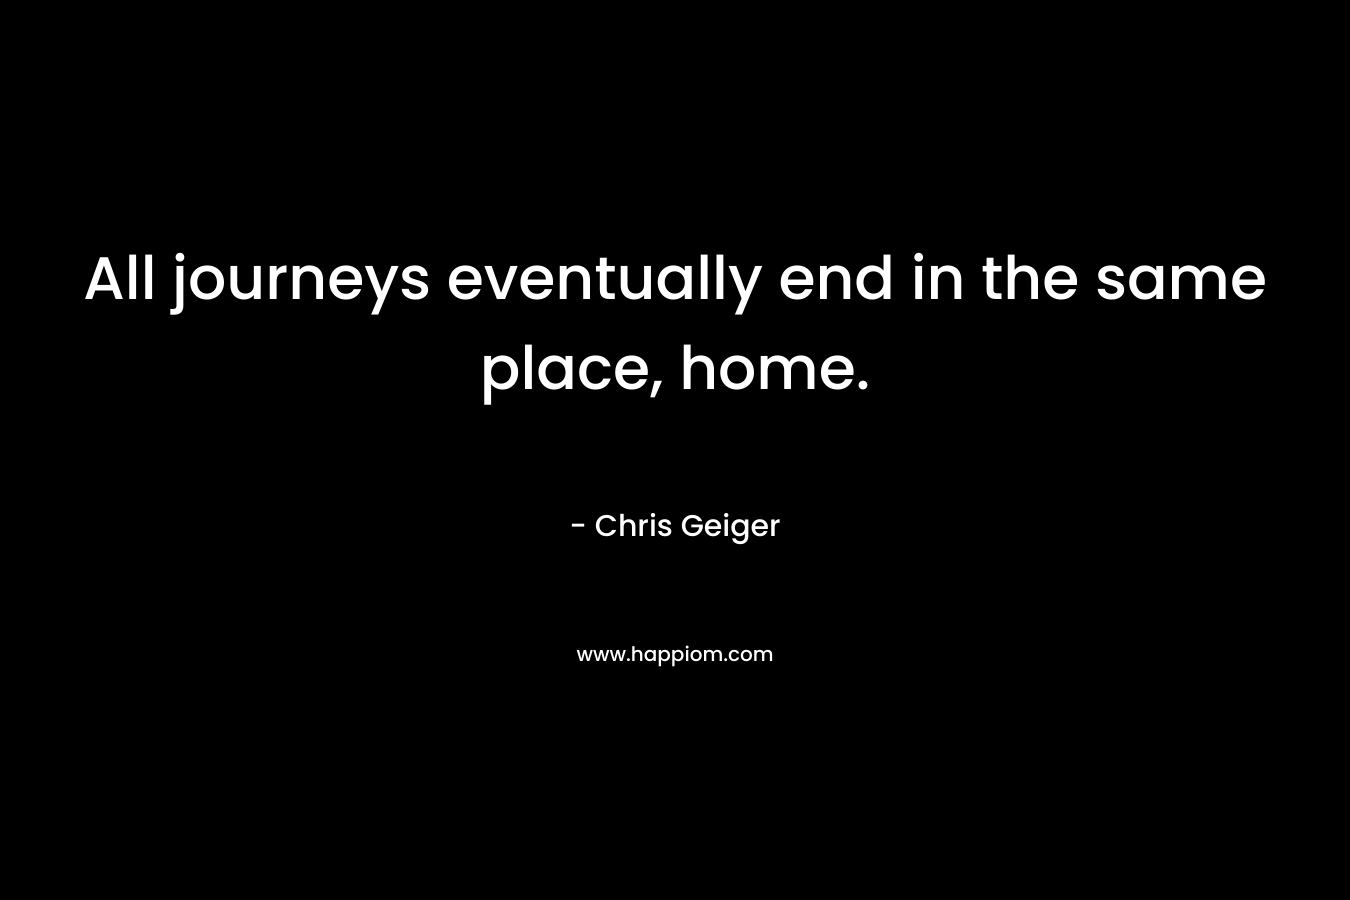 All journeys eventually end in the same place, home.